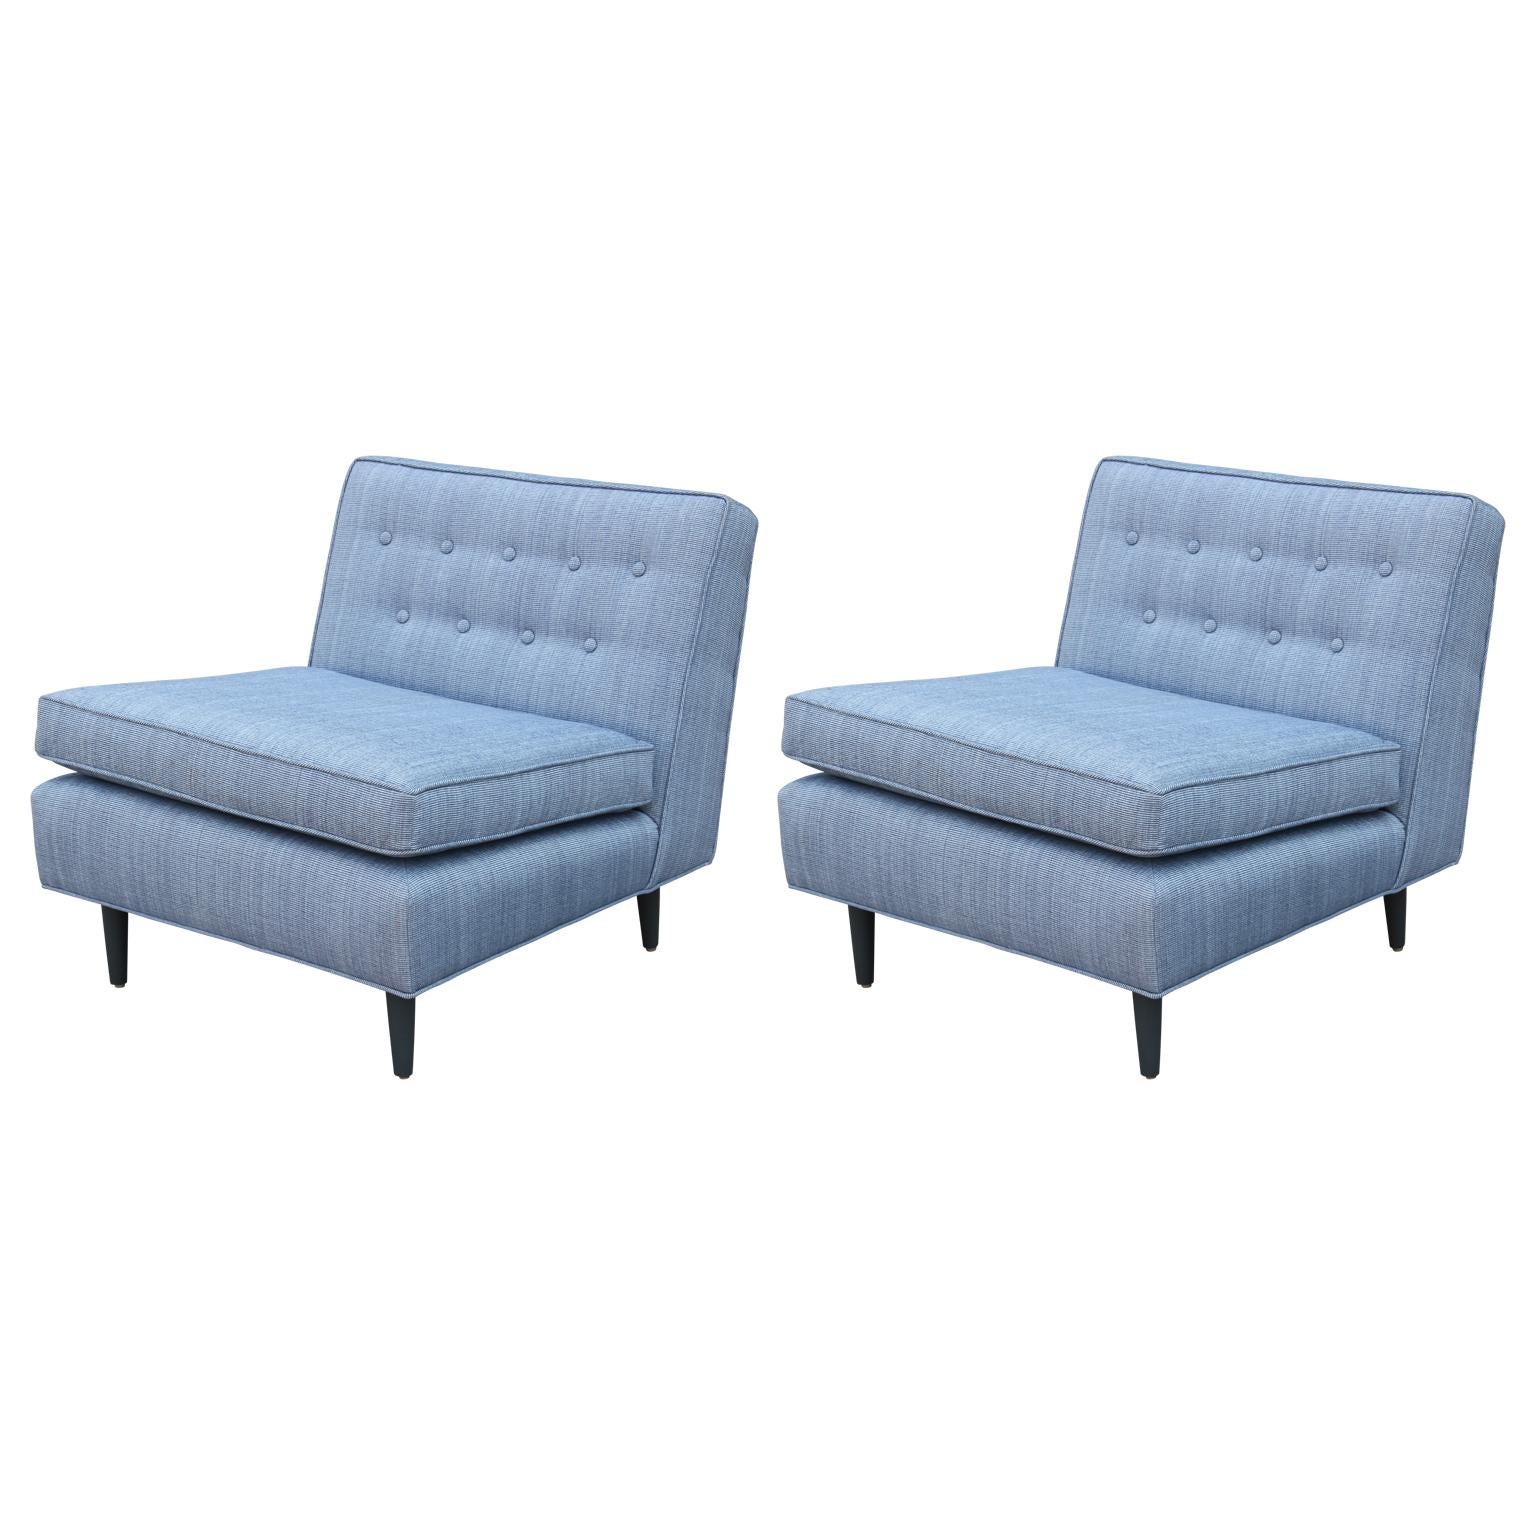 Pair of Modern Blue Slipper Lounge Chairs with French Blue Stained Legs